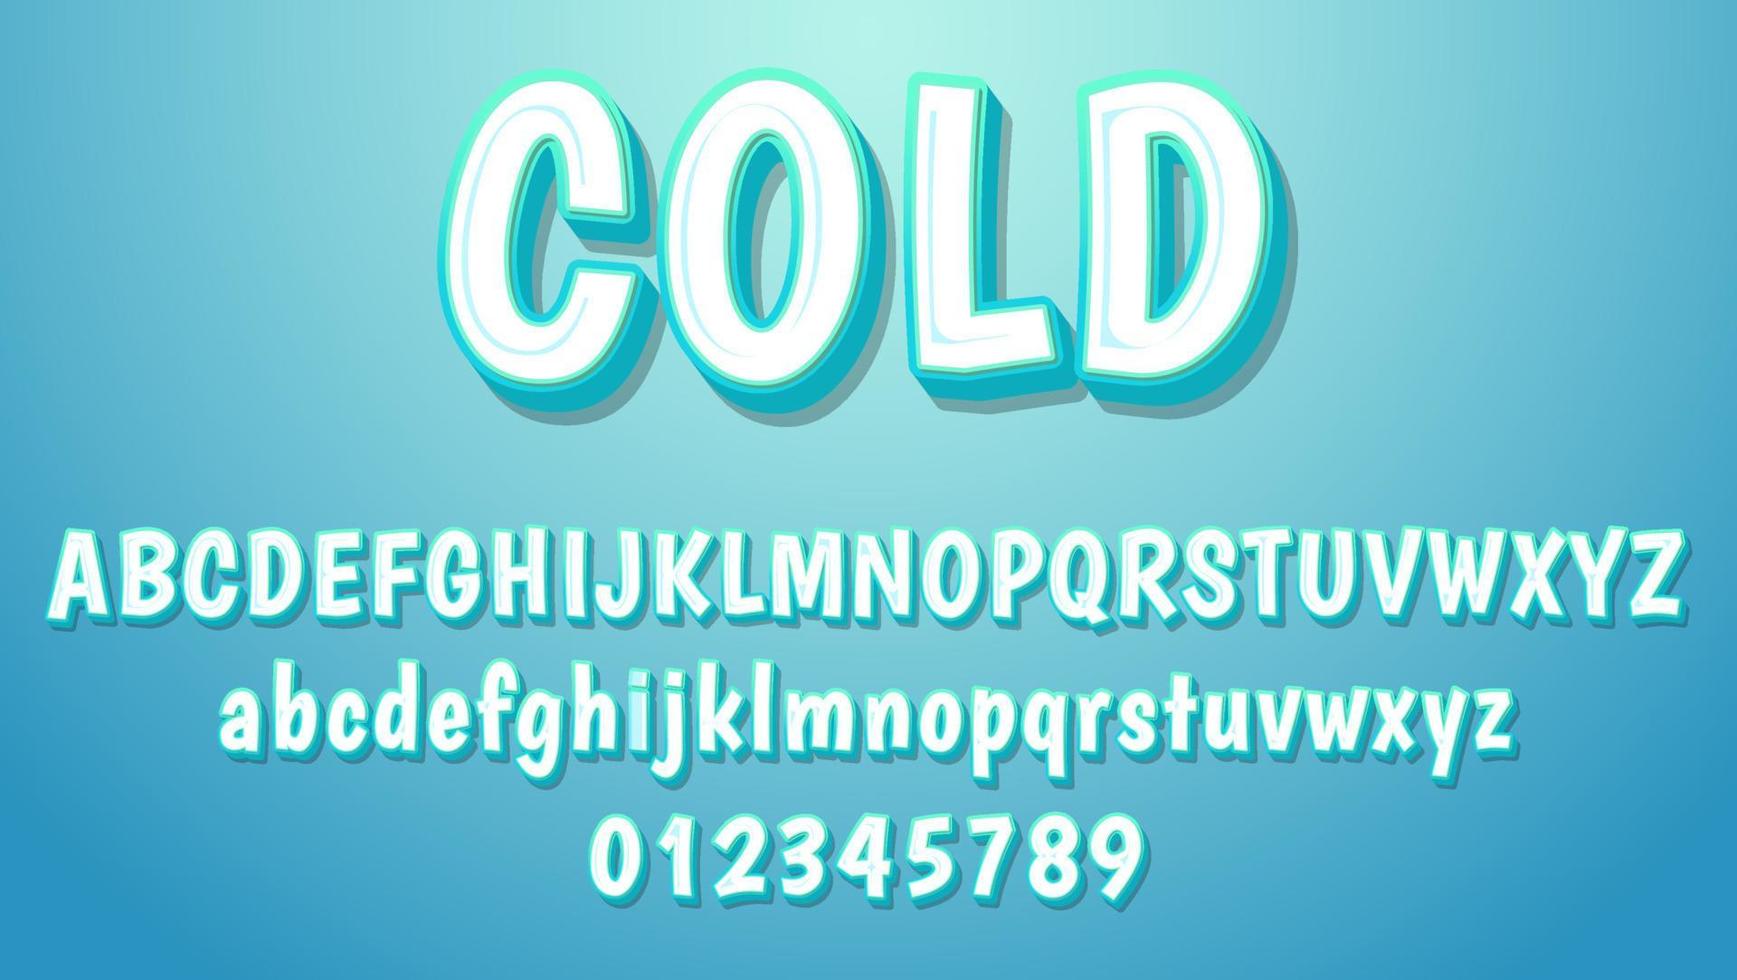 3d Cold Fully Editable Text Effect Design Template In Blue Background vector